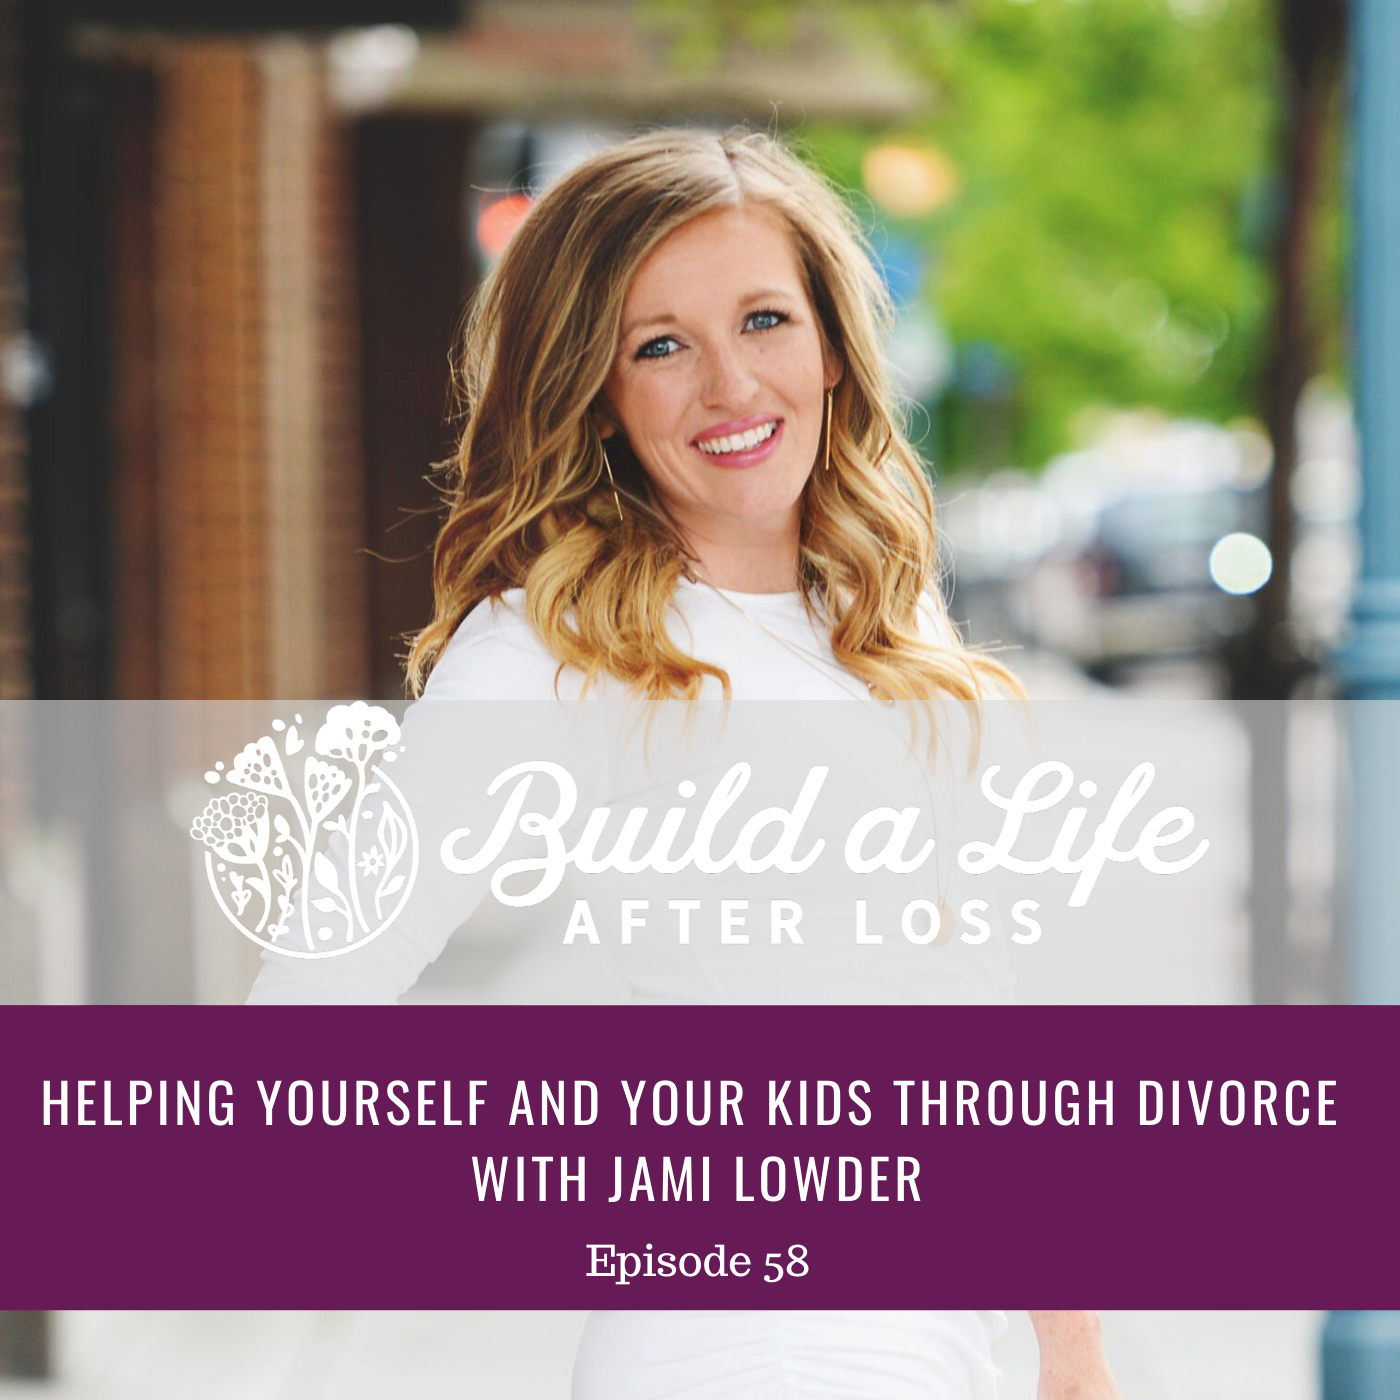 Featured image for “Ep #58 Helping Yourself and Your Kids Through Divorce with Jami Lowder”